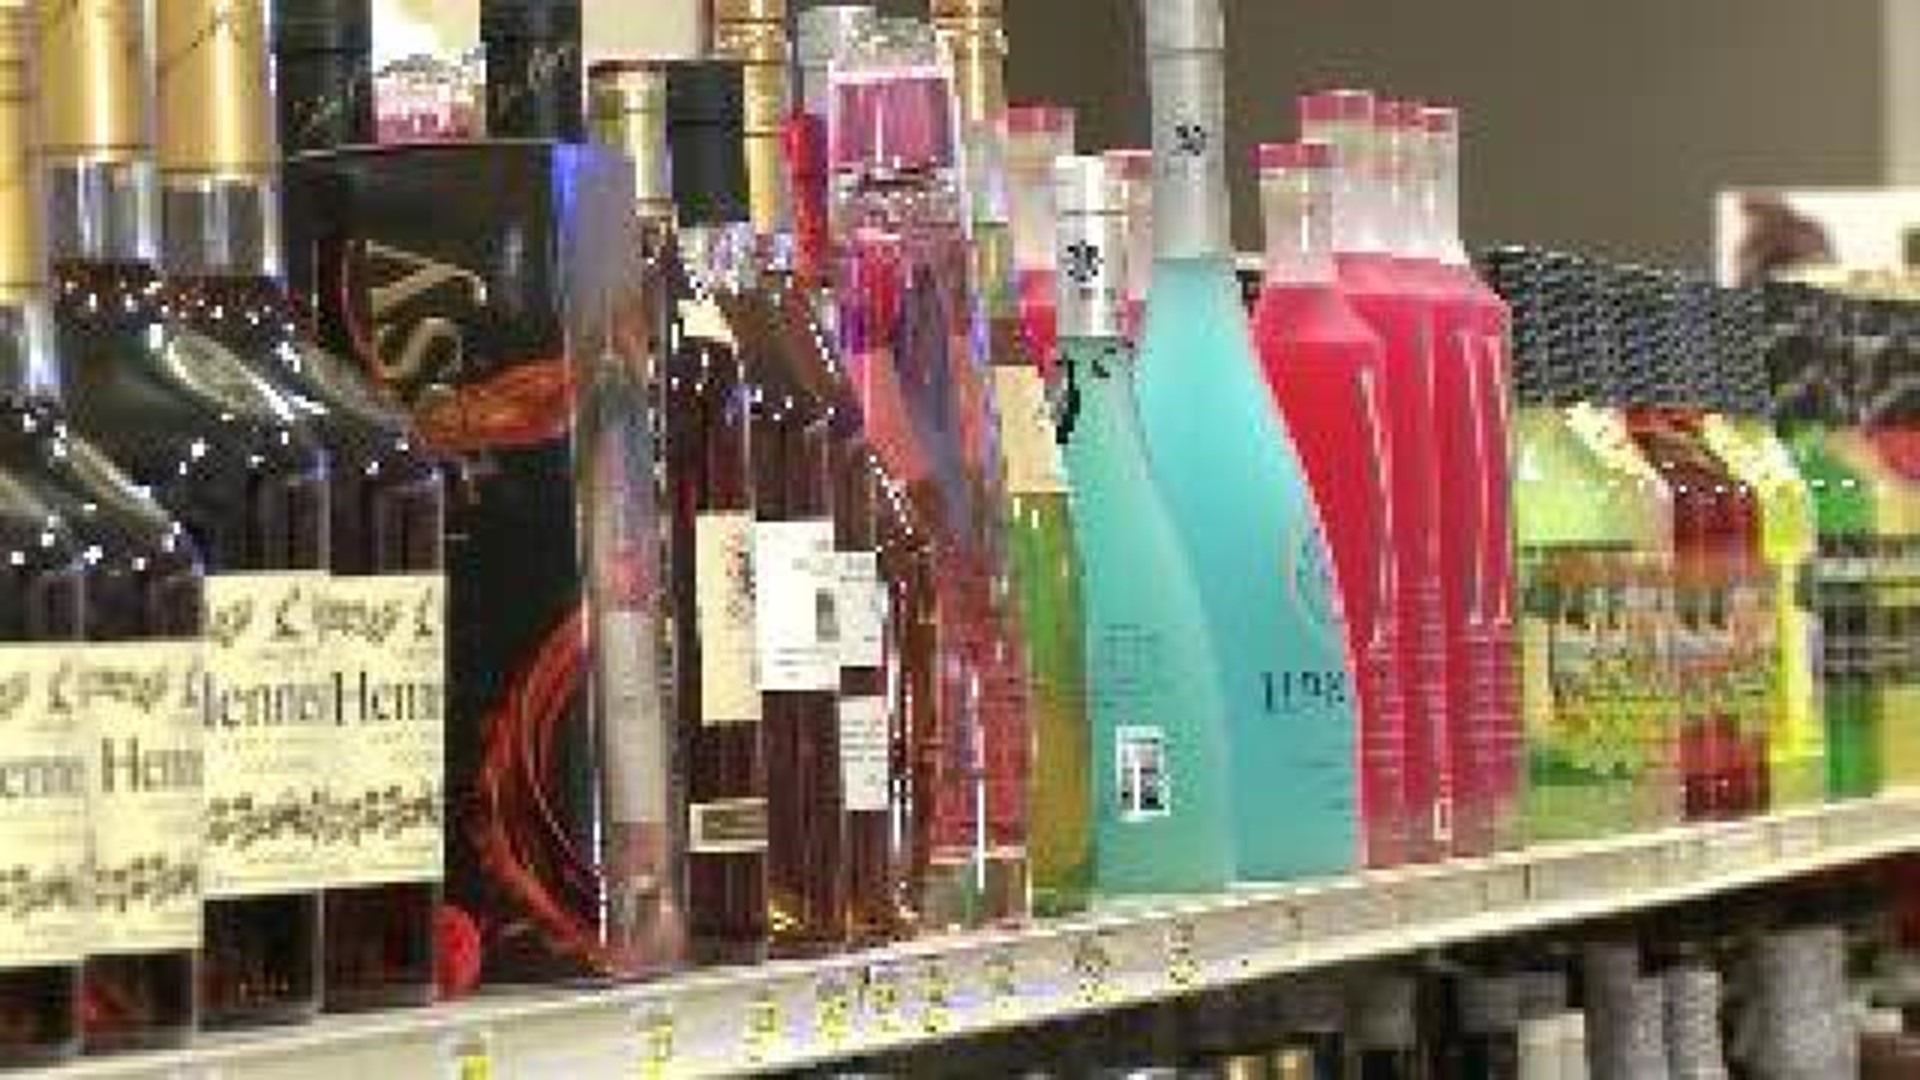 Springdale Owners Need to Wait to Sell Liquor on Sundays